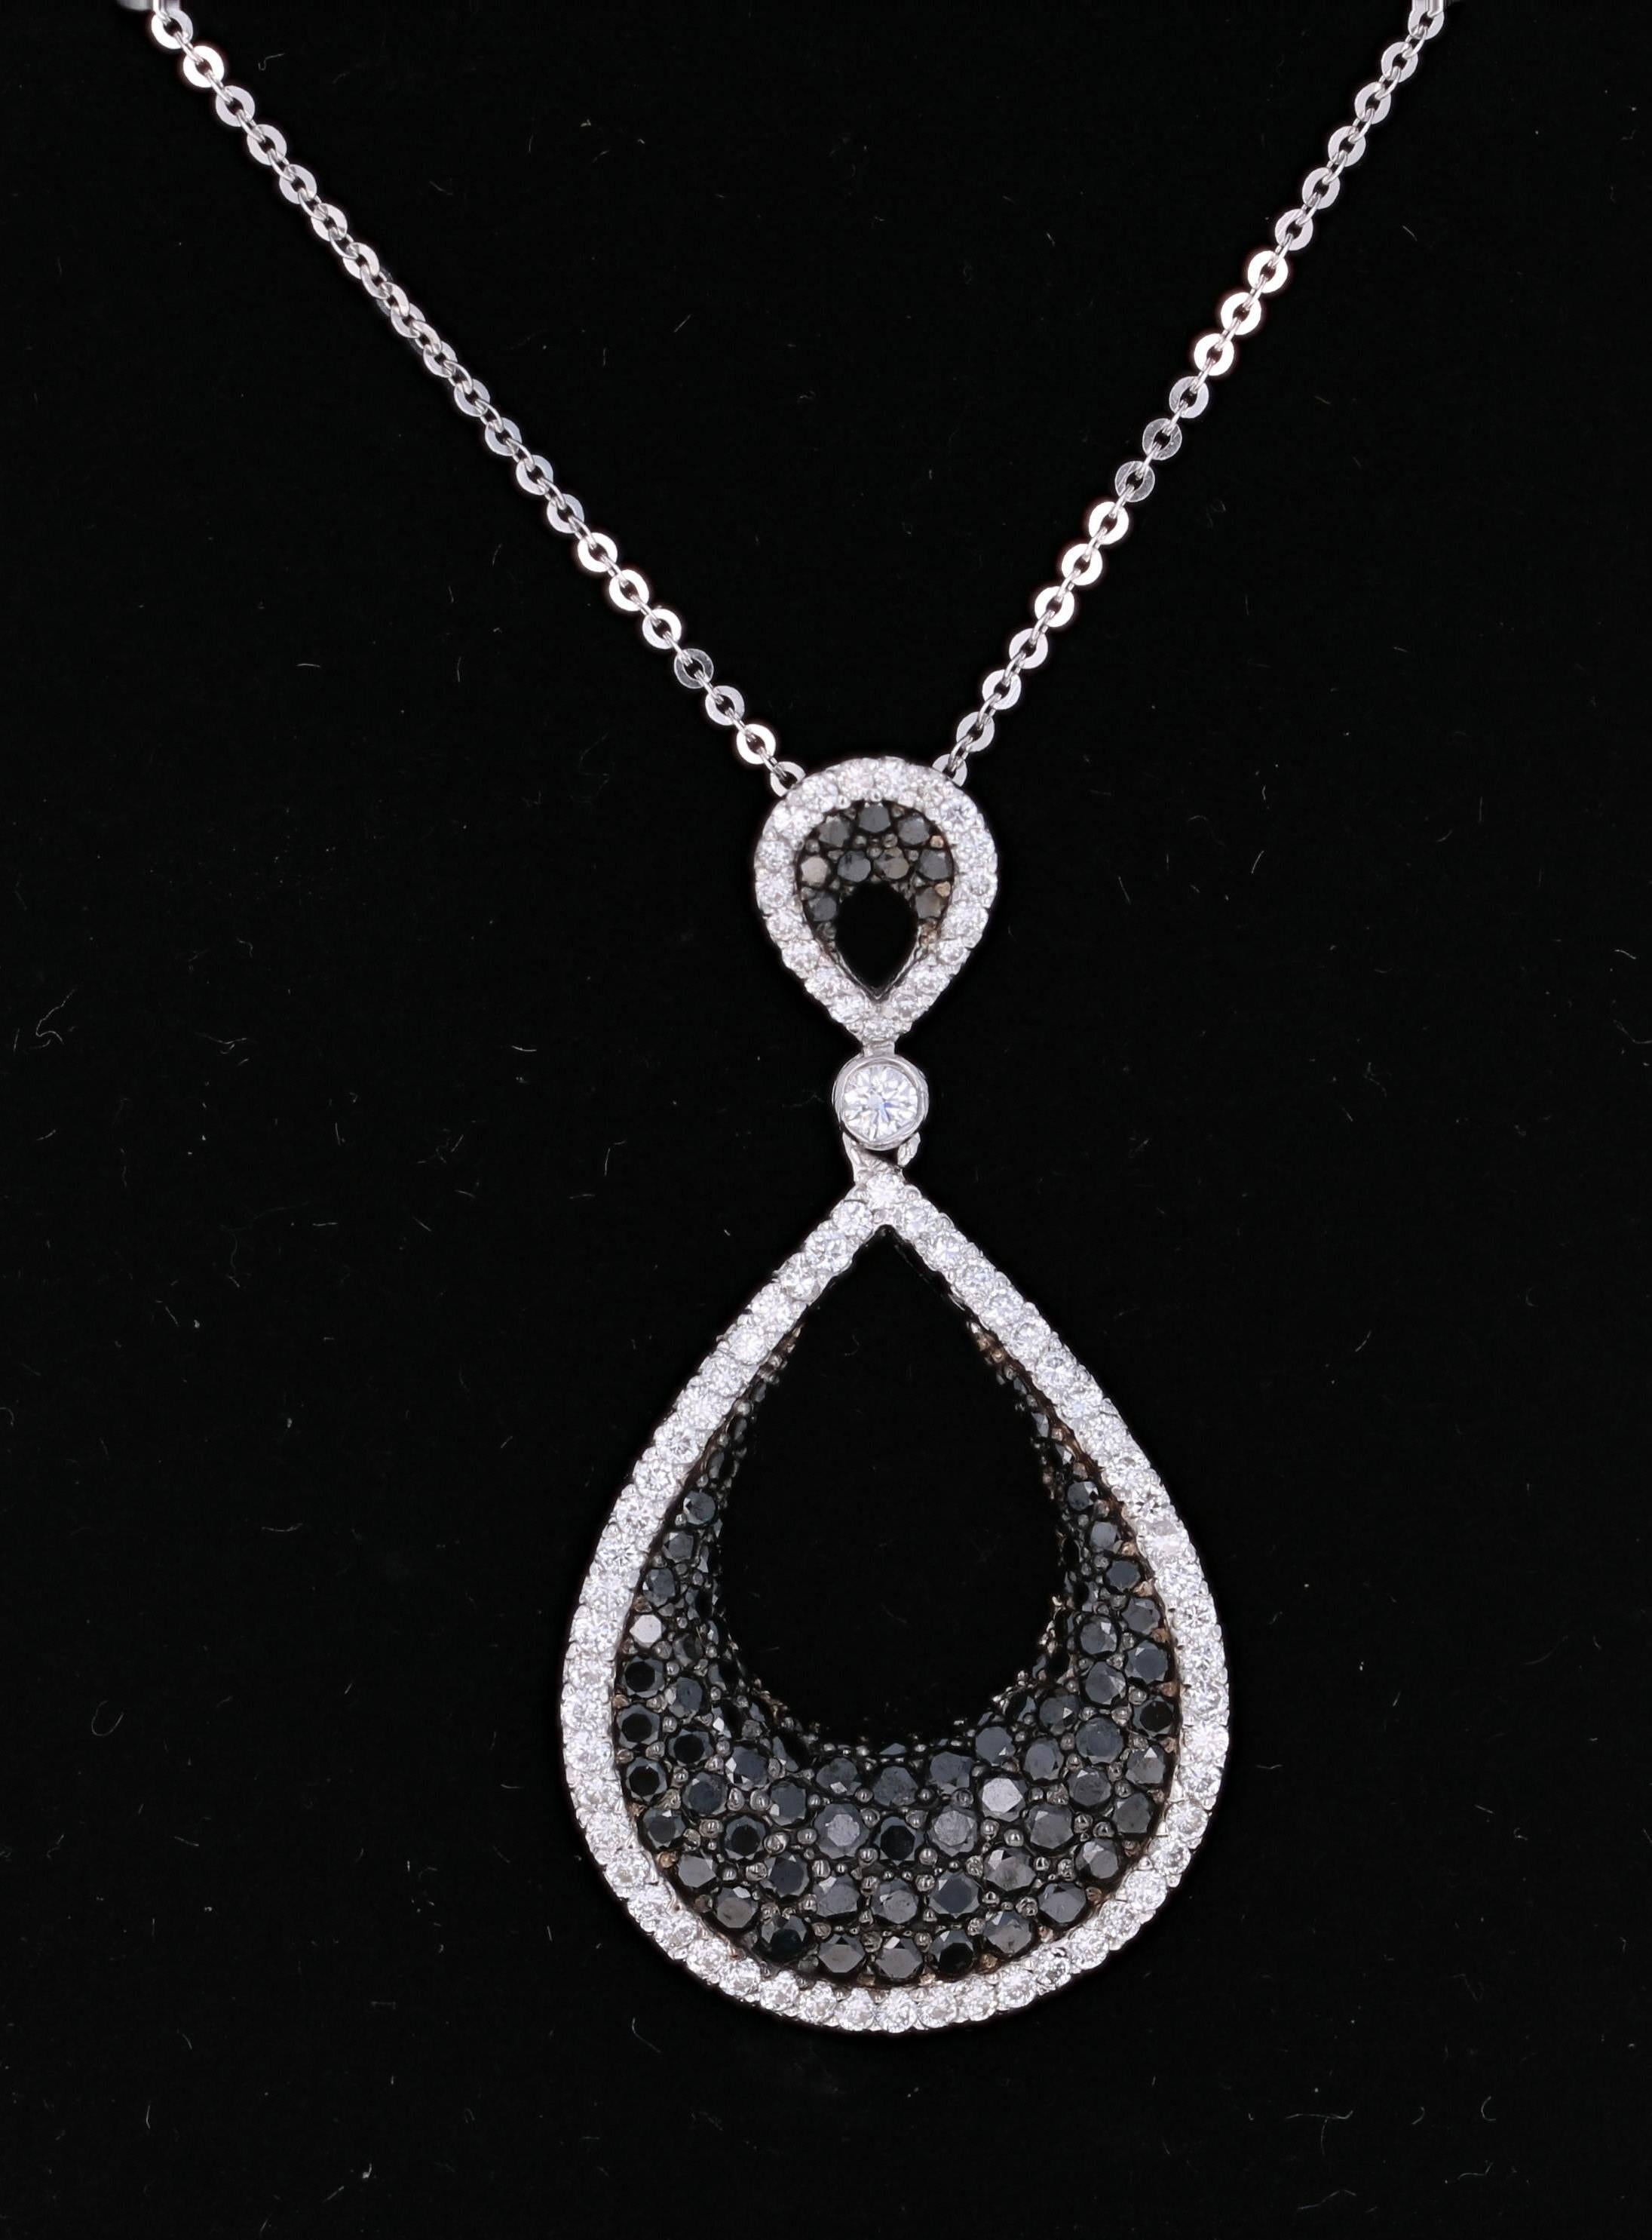 Beautiful 2.05 Carat Black Diamond and White Diamond Pendant in 14K White Gold.  This intricate design has 76 Round Cut Diamonds that weigh 0.75 carats (Clarity: VS2, Color: F) and 90 Black Diamonds that weigh 1.30 carats.  The Black Diamond is a